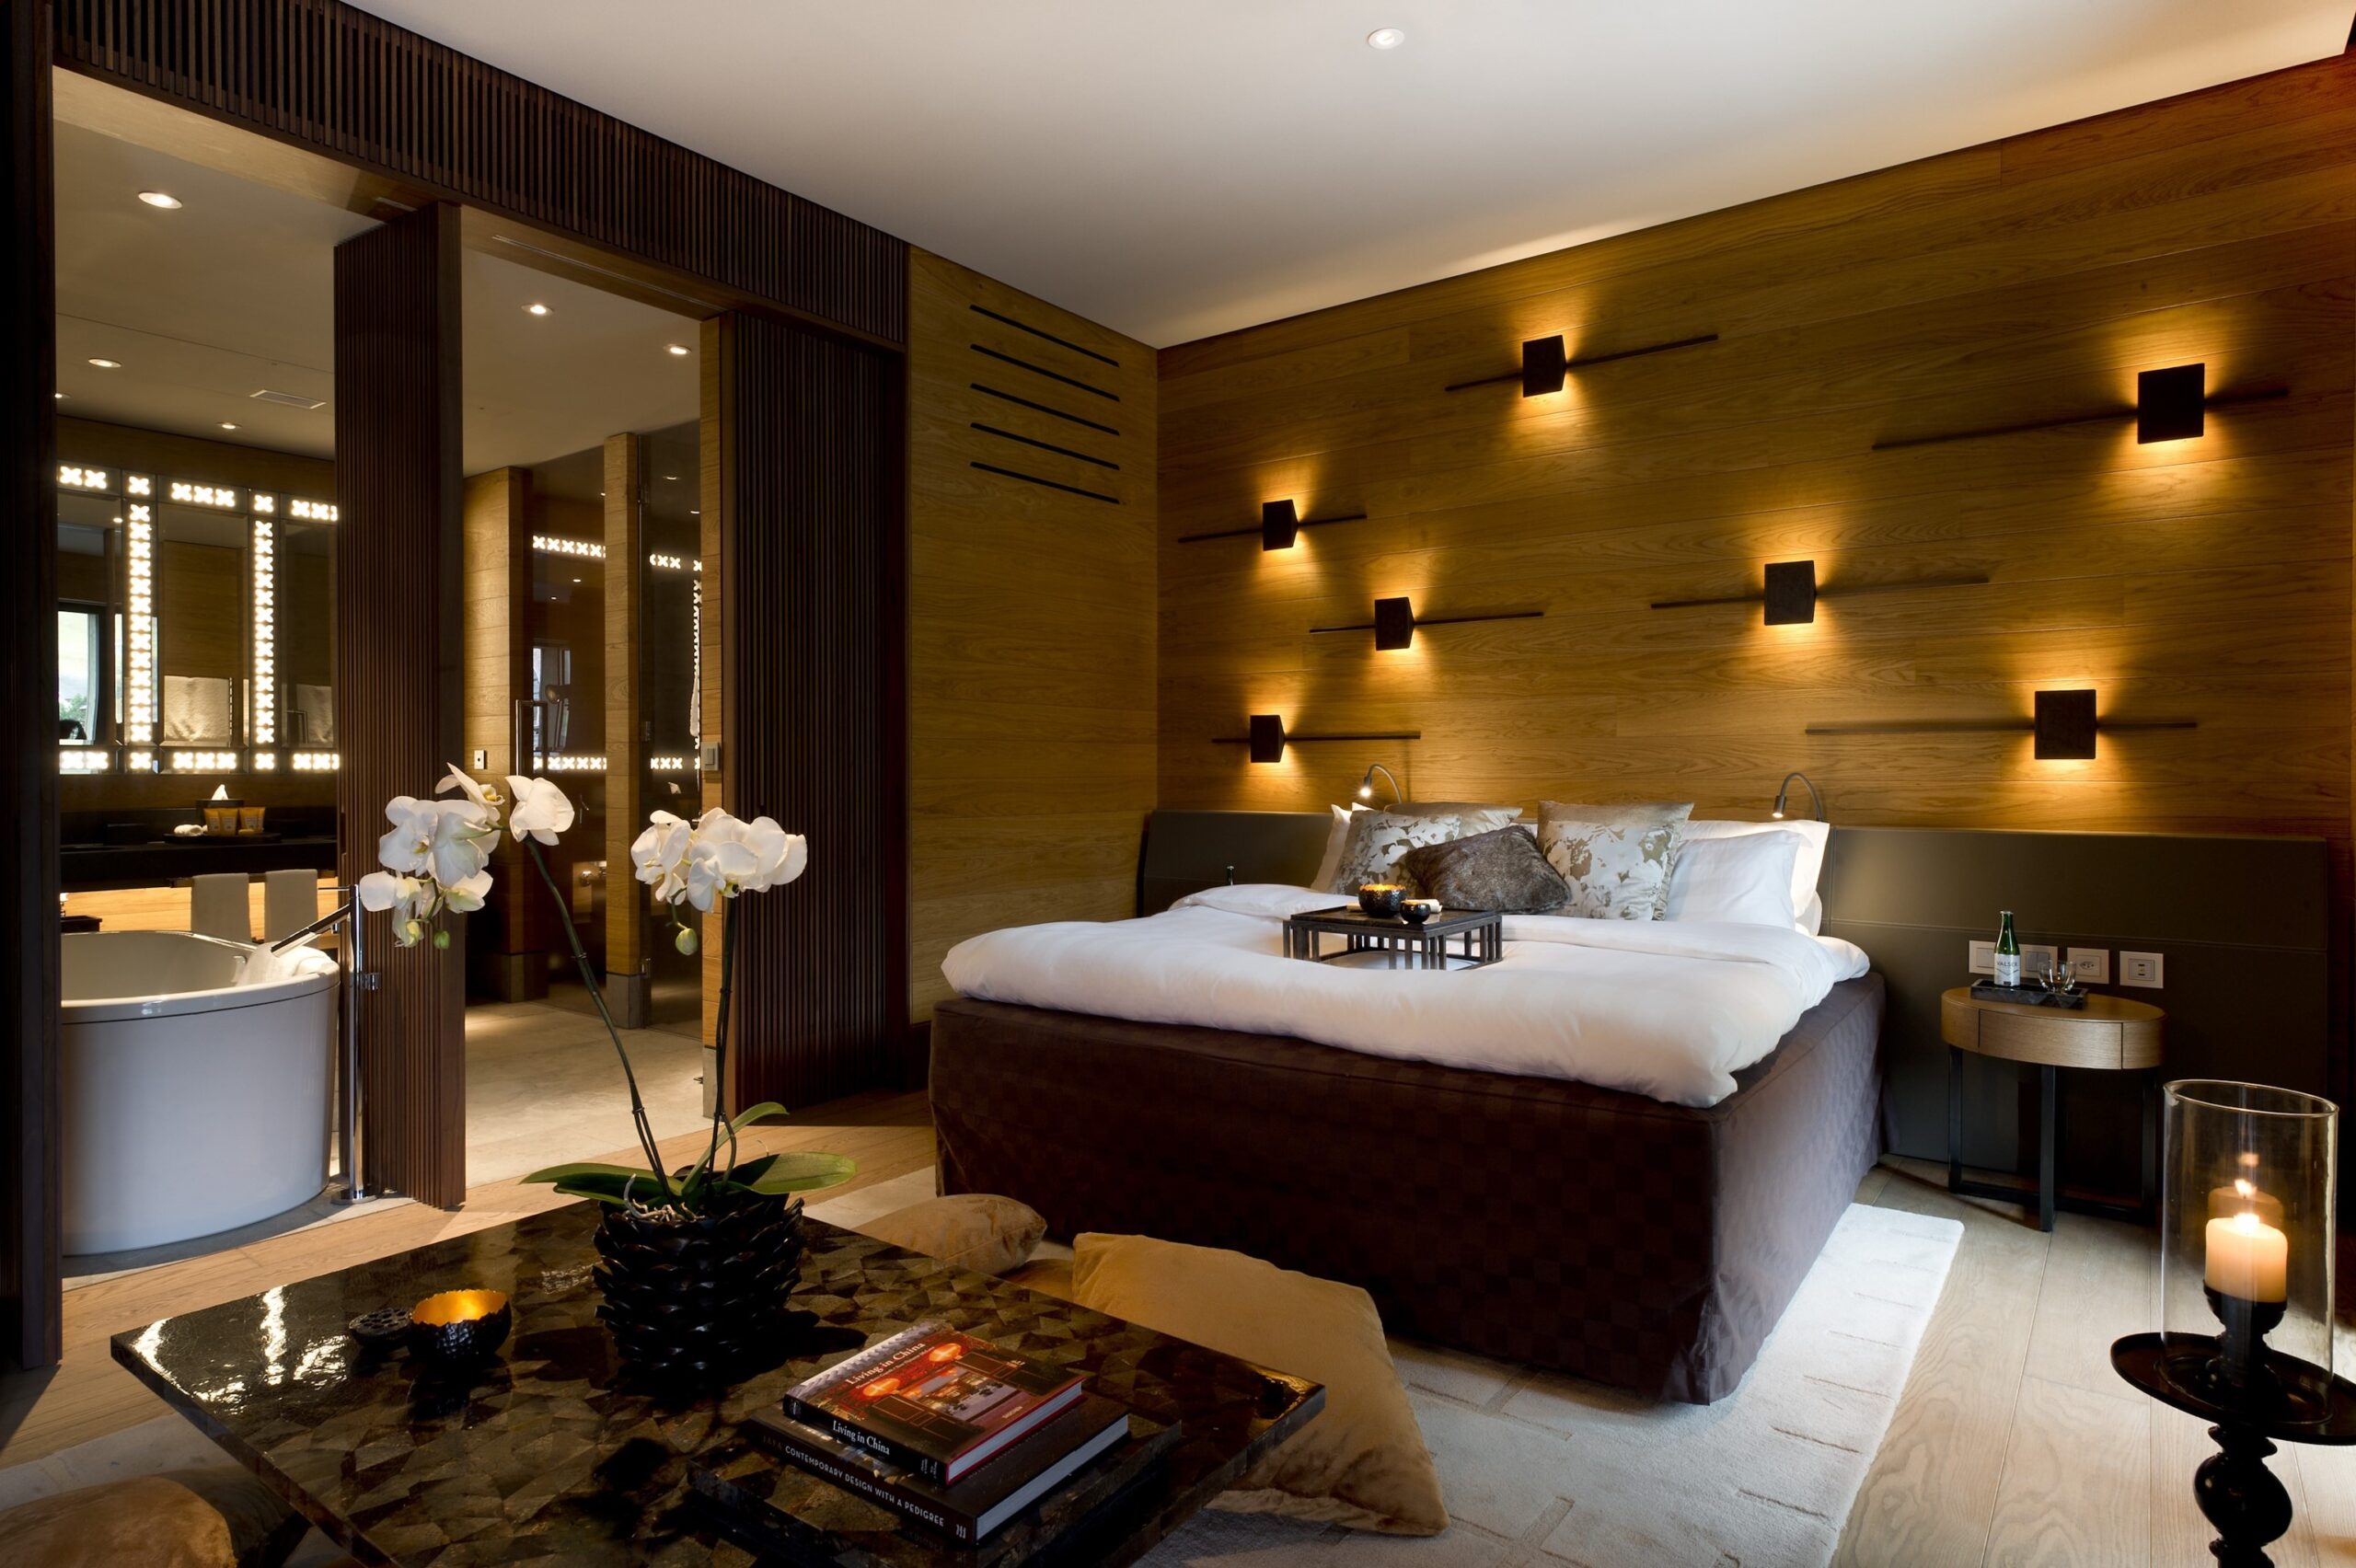 Luxury bedroom interior design at the Chedi Andermatt, one of the best hotels in Switzerland